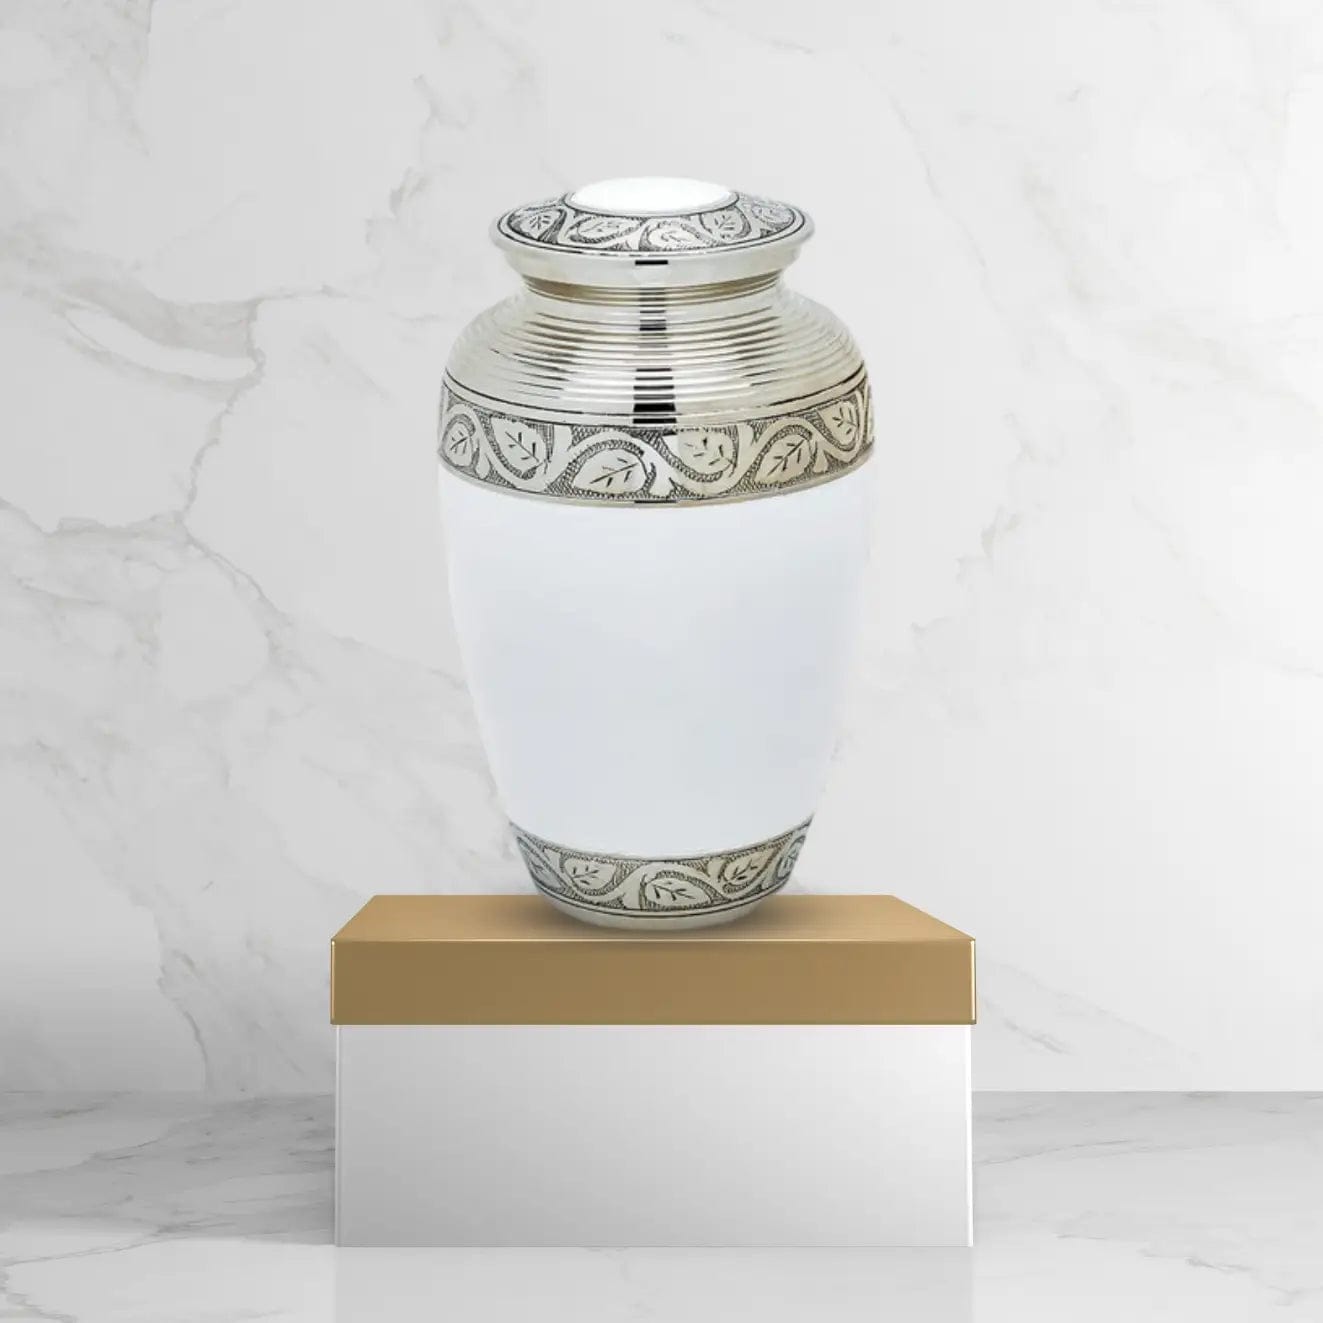 Brass Cremation Urn - Adult Brass White Cremation Urn for Human Ashes